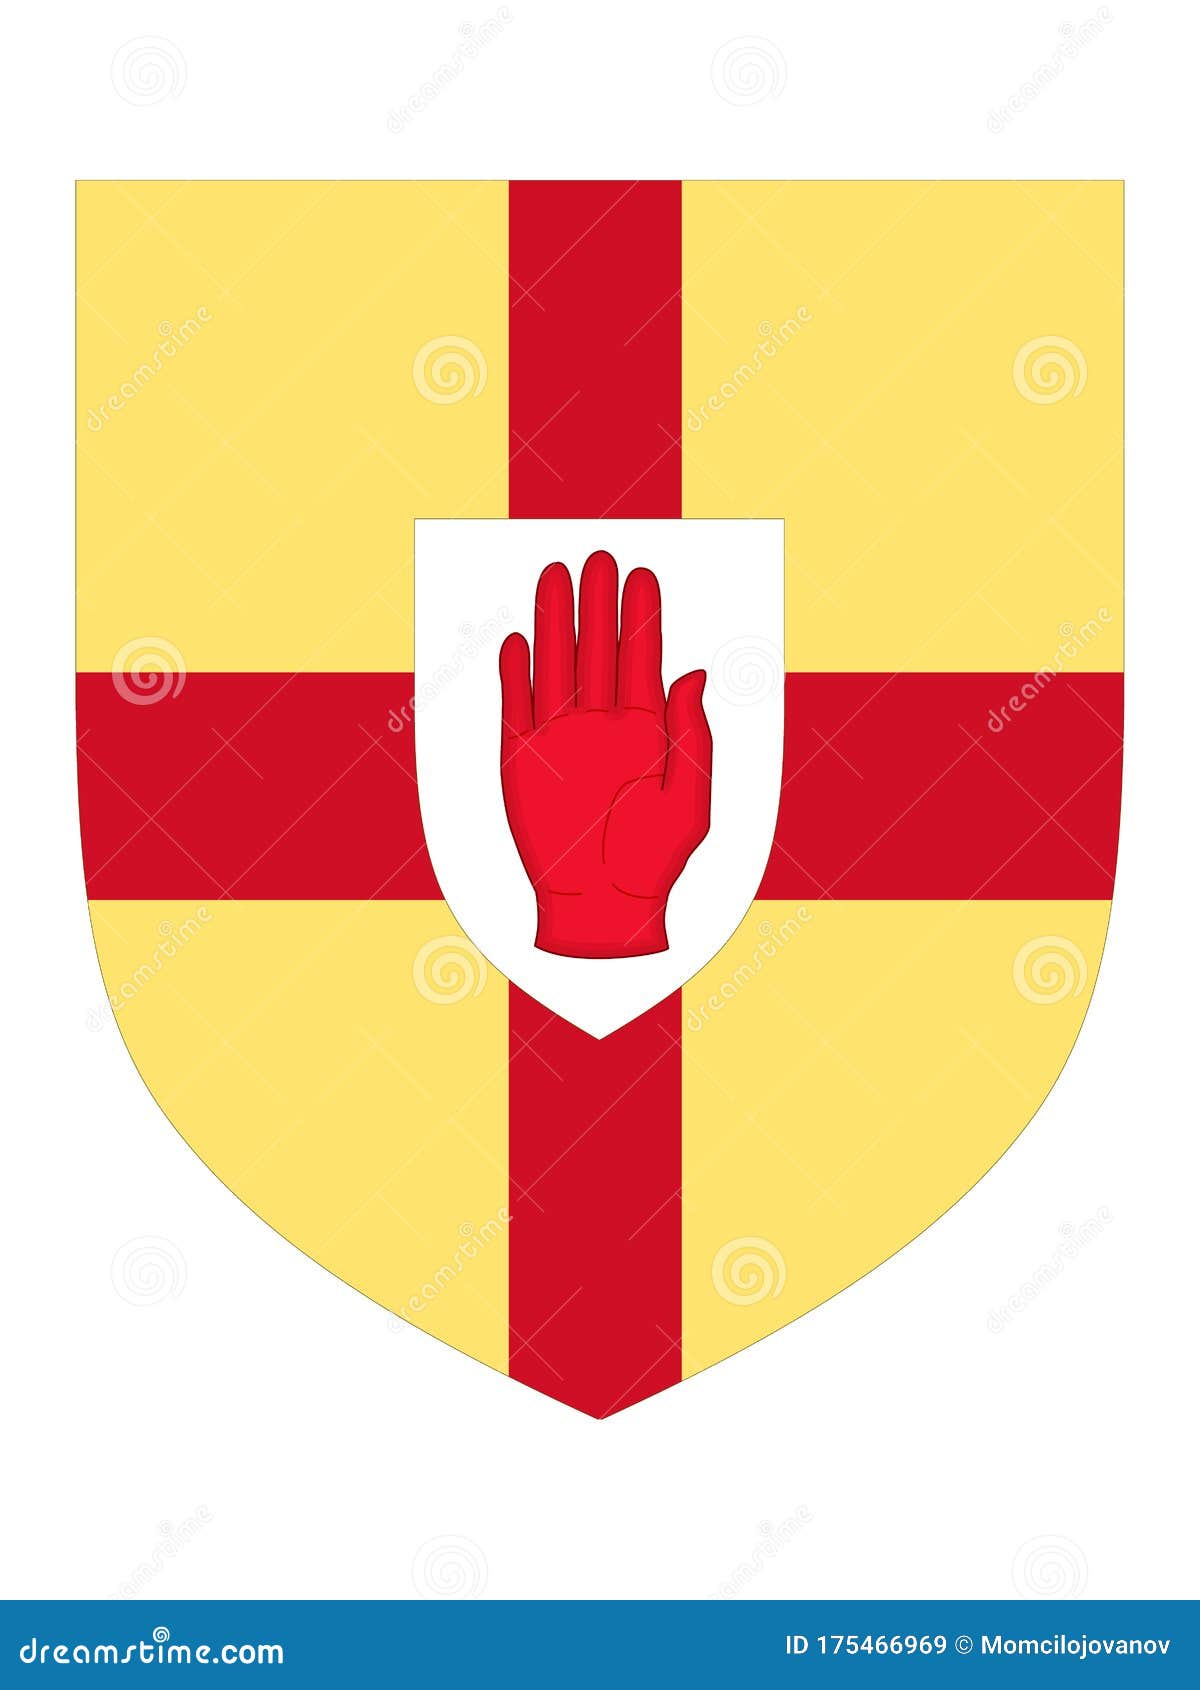 Coat of Arms of Ulster stock vector. Illustration of county ...